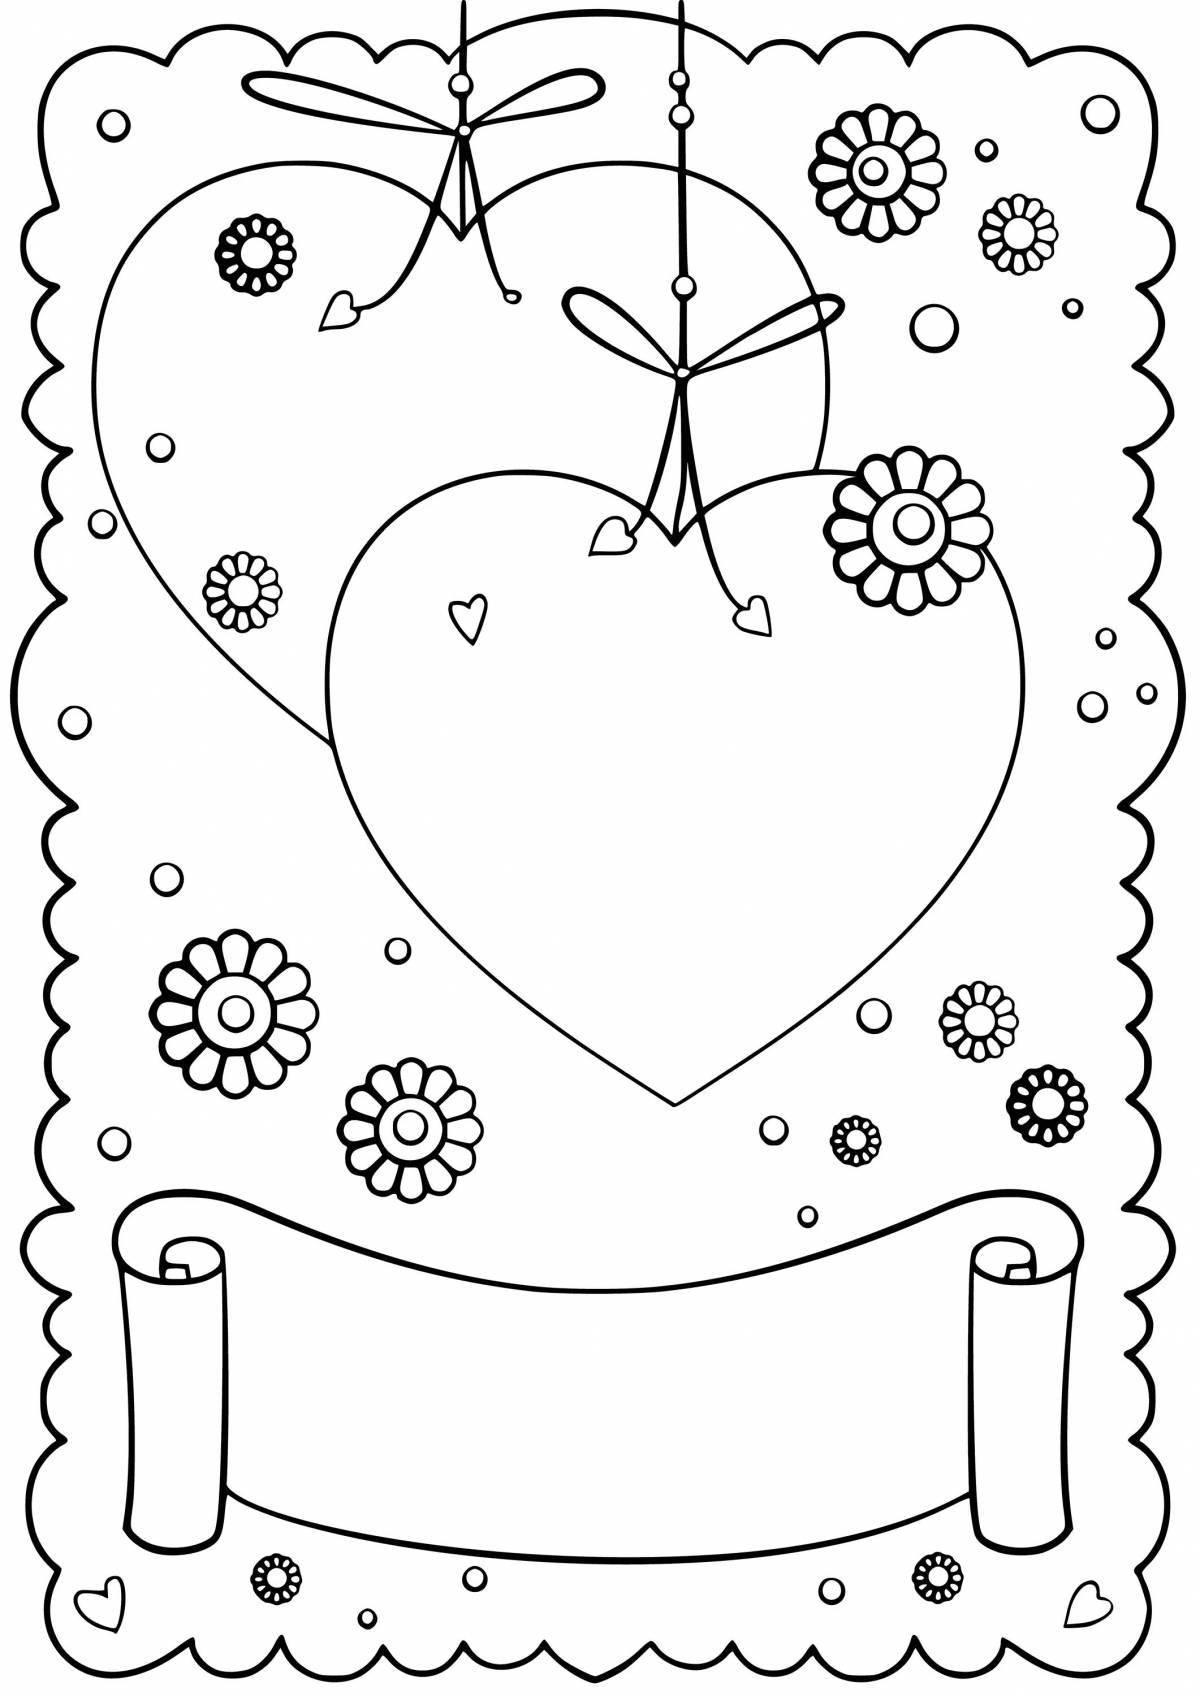 Creative valentine's day coloring book for kids